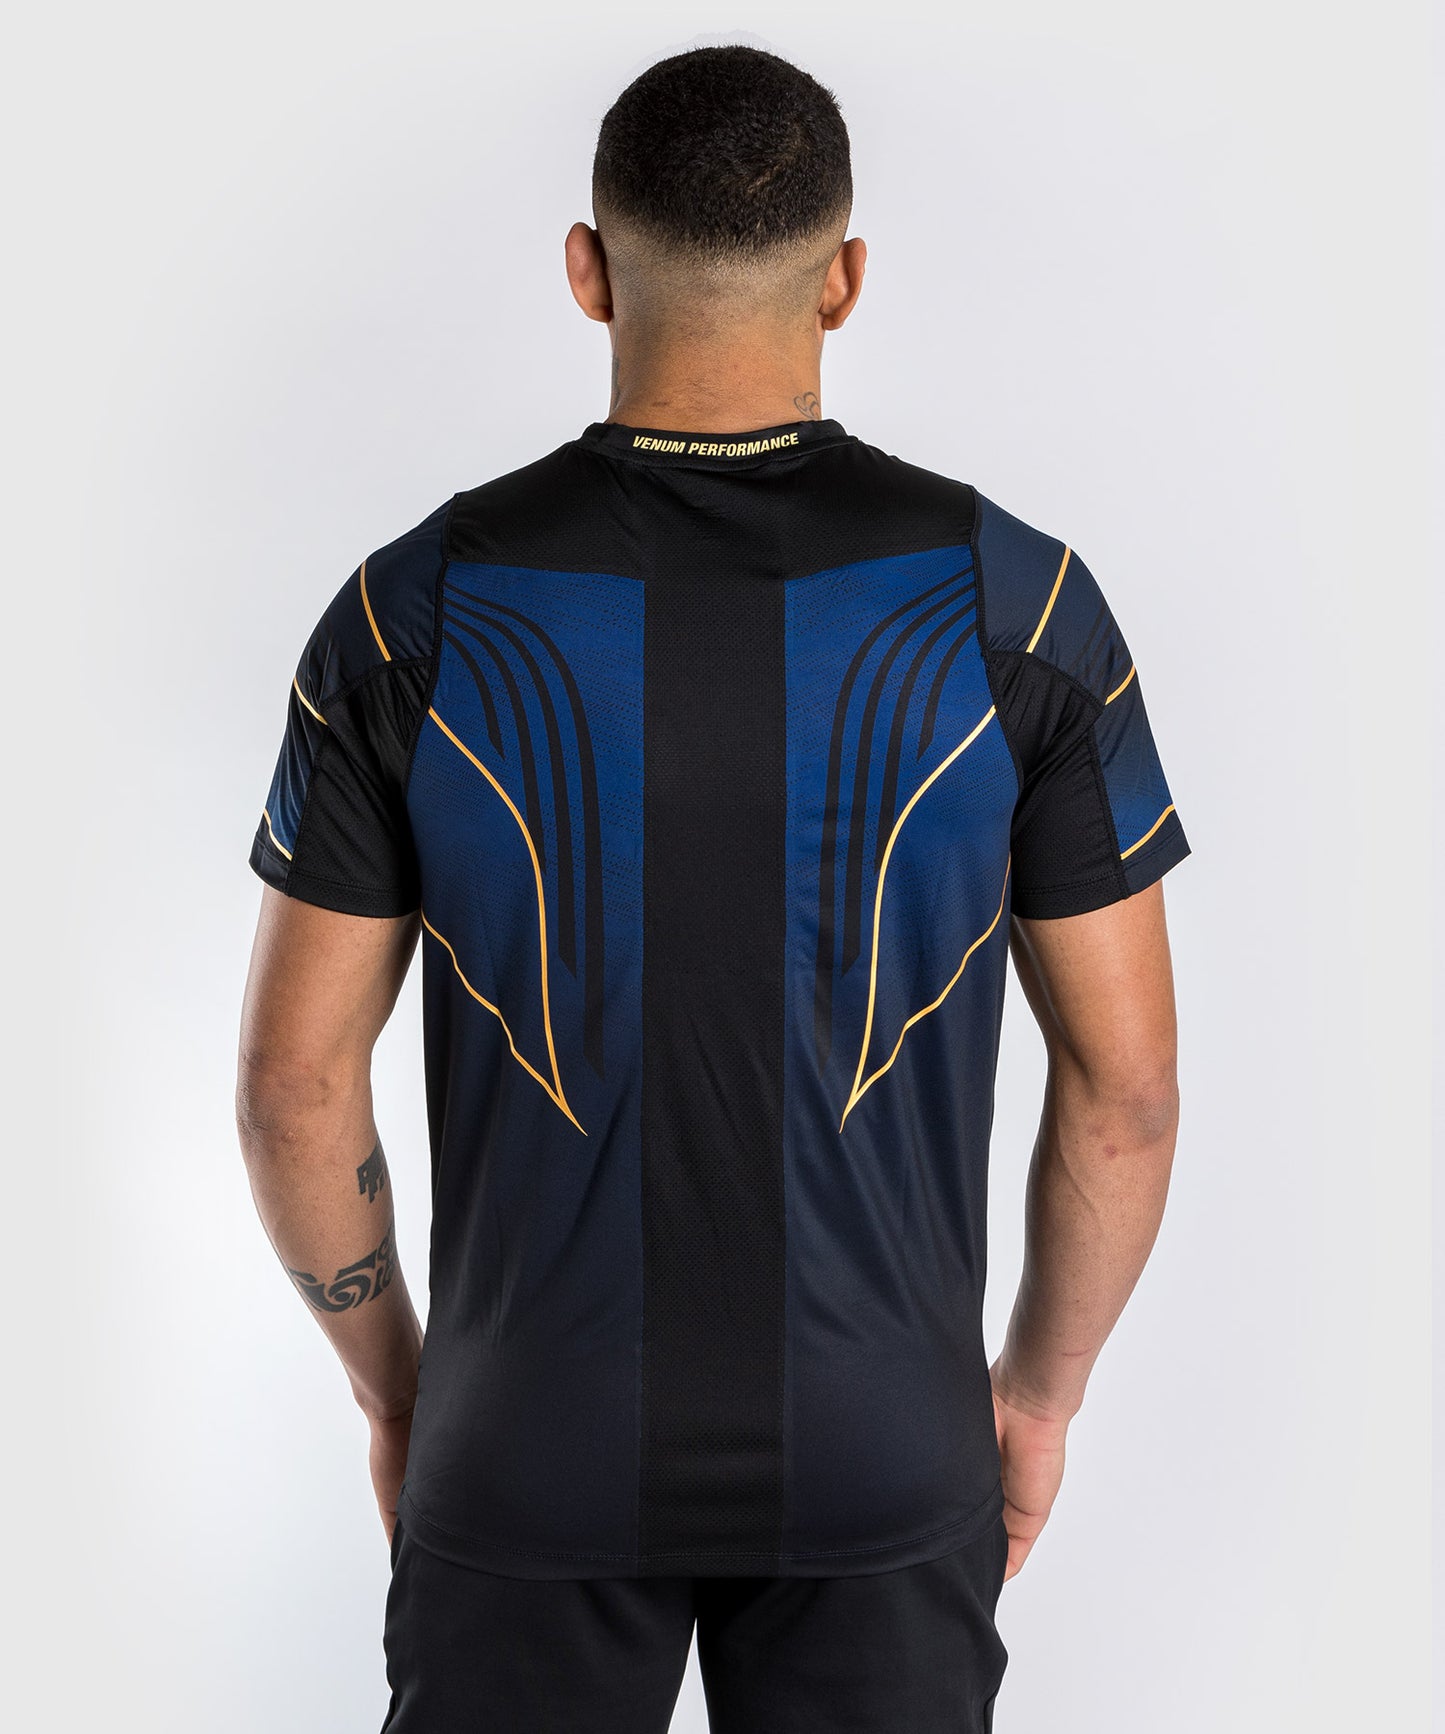 UFC Venum Personalized Authentic Fight Night 2.0 Kit by Venum Men's Walkout Jersey - Midnight Edition - Champion